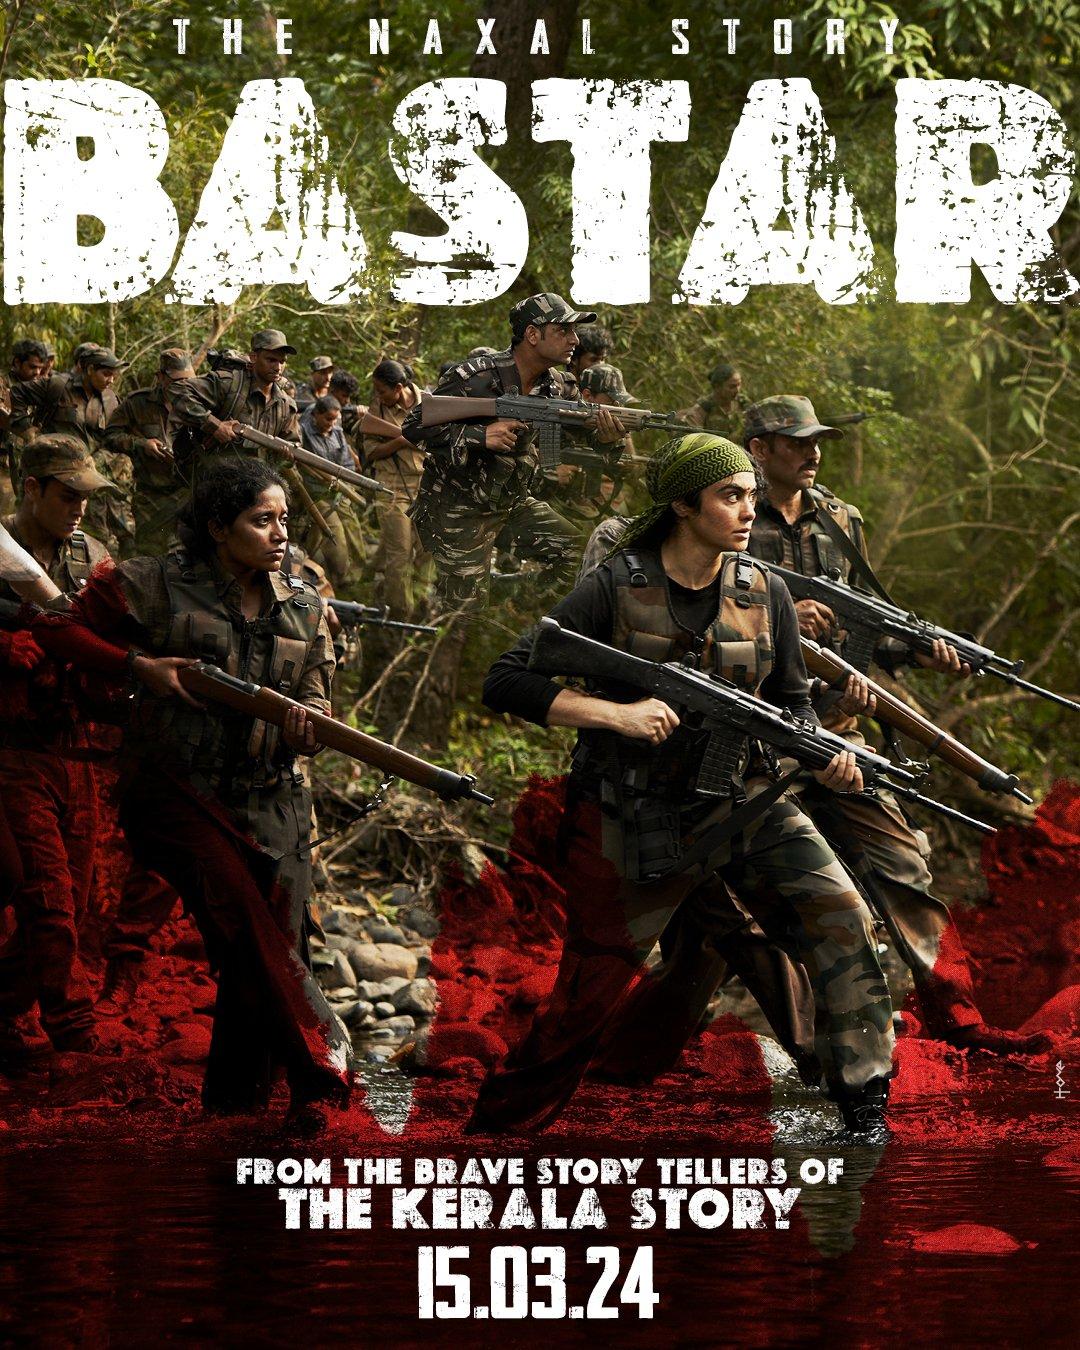 Bastar: The Naxal Story (March 15) - TheatreDirected by Sudipto Sen and produced by Vipul Amrutal Shah, 